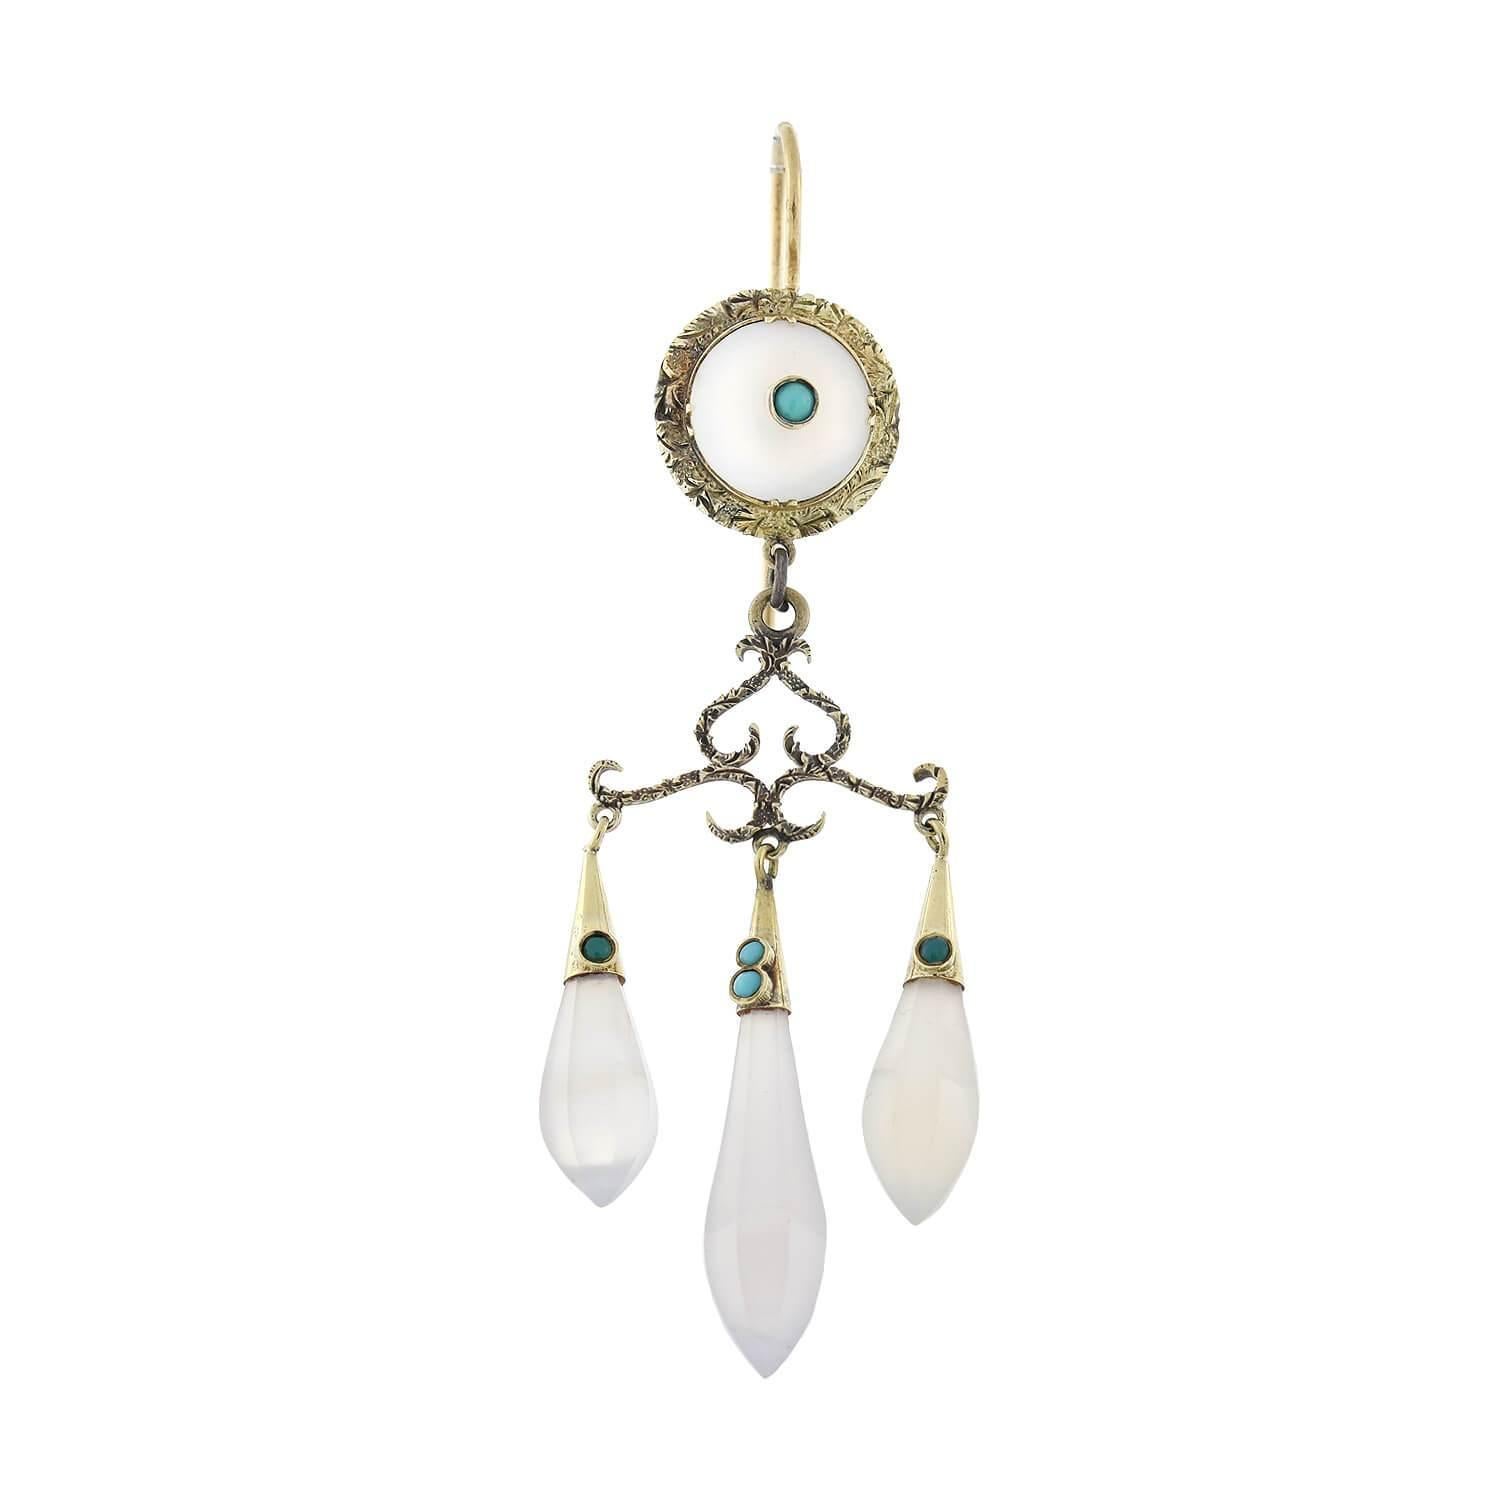 A gorgeous pair of earrings from the Victorian (ca1880s) era! Crafted in 15kt yellow gold, these unusual earrings begin with a lovely turquoise stone riveted through the center of a chalcedony cabochon. The translucent, milky white chalcedony is